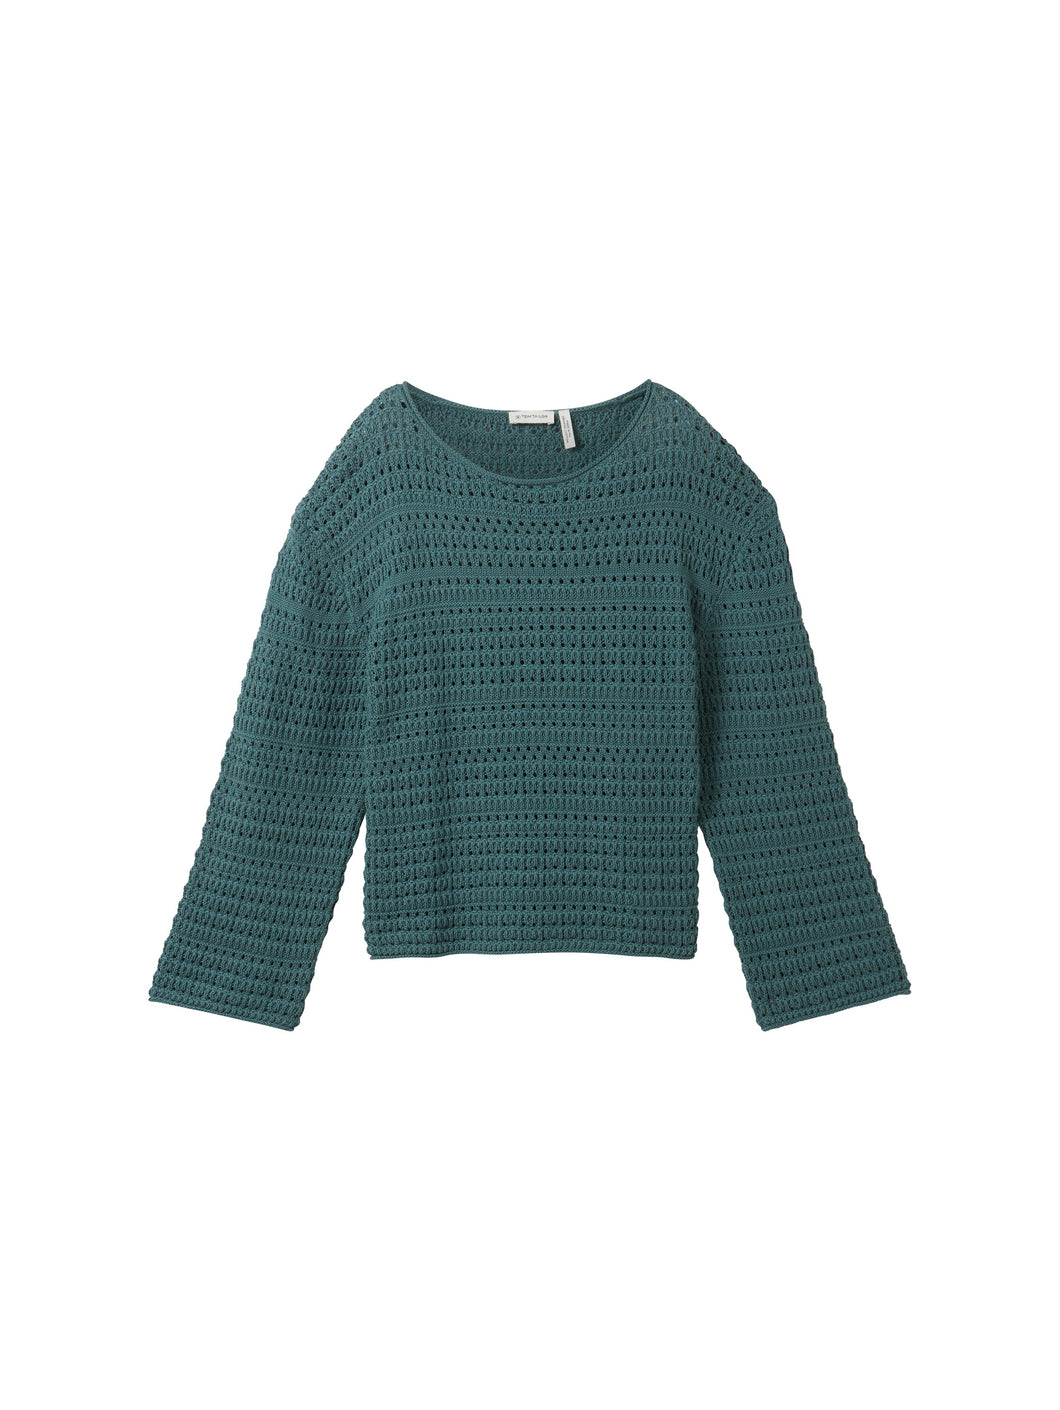 TOM TAILOR KNIT PULLOVER STRUCTURED sea pine green